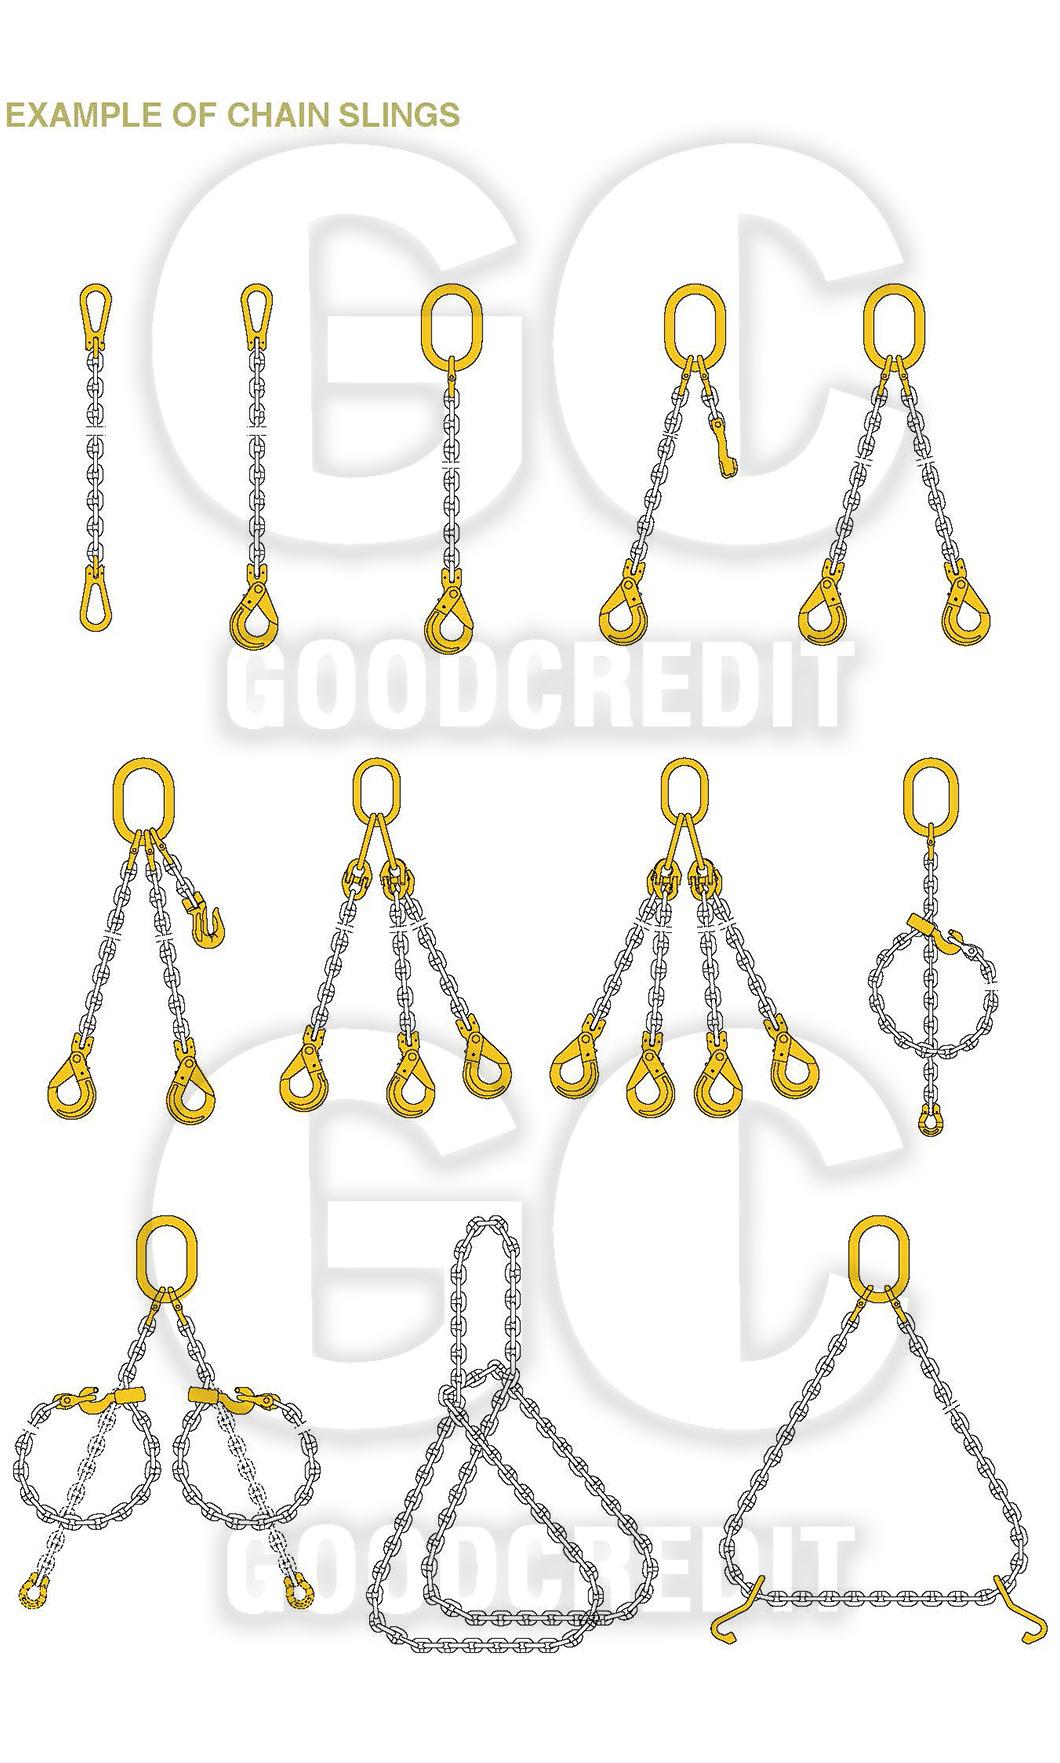 Heavy Duty Transport Lifting Binder Chain with Grab Hook